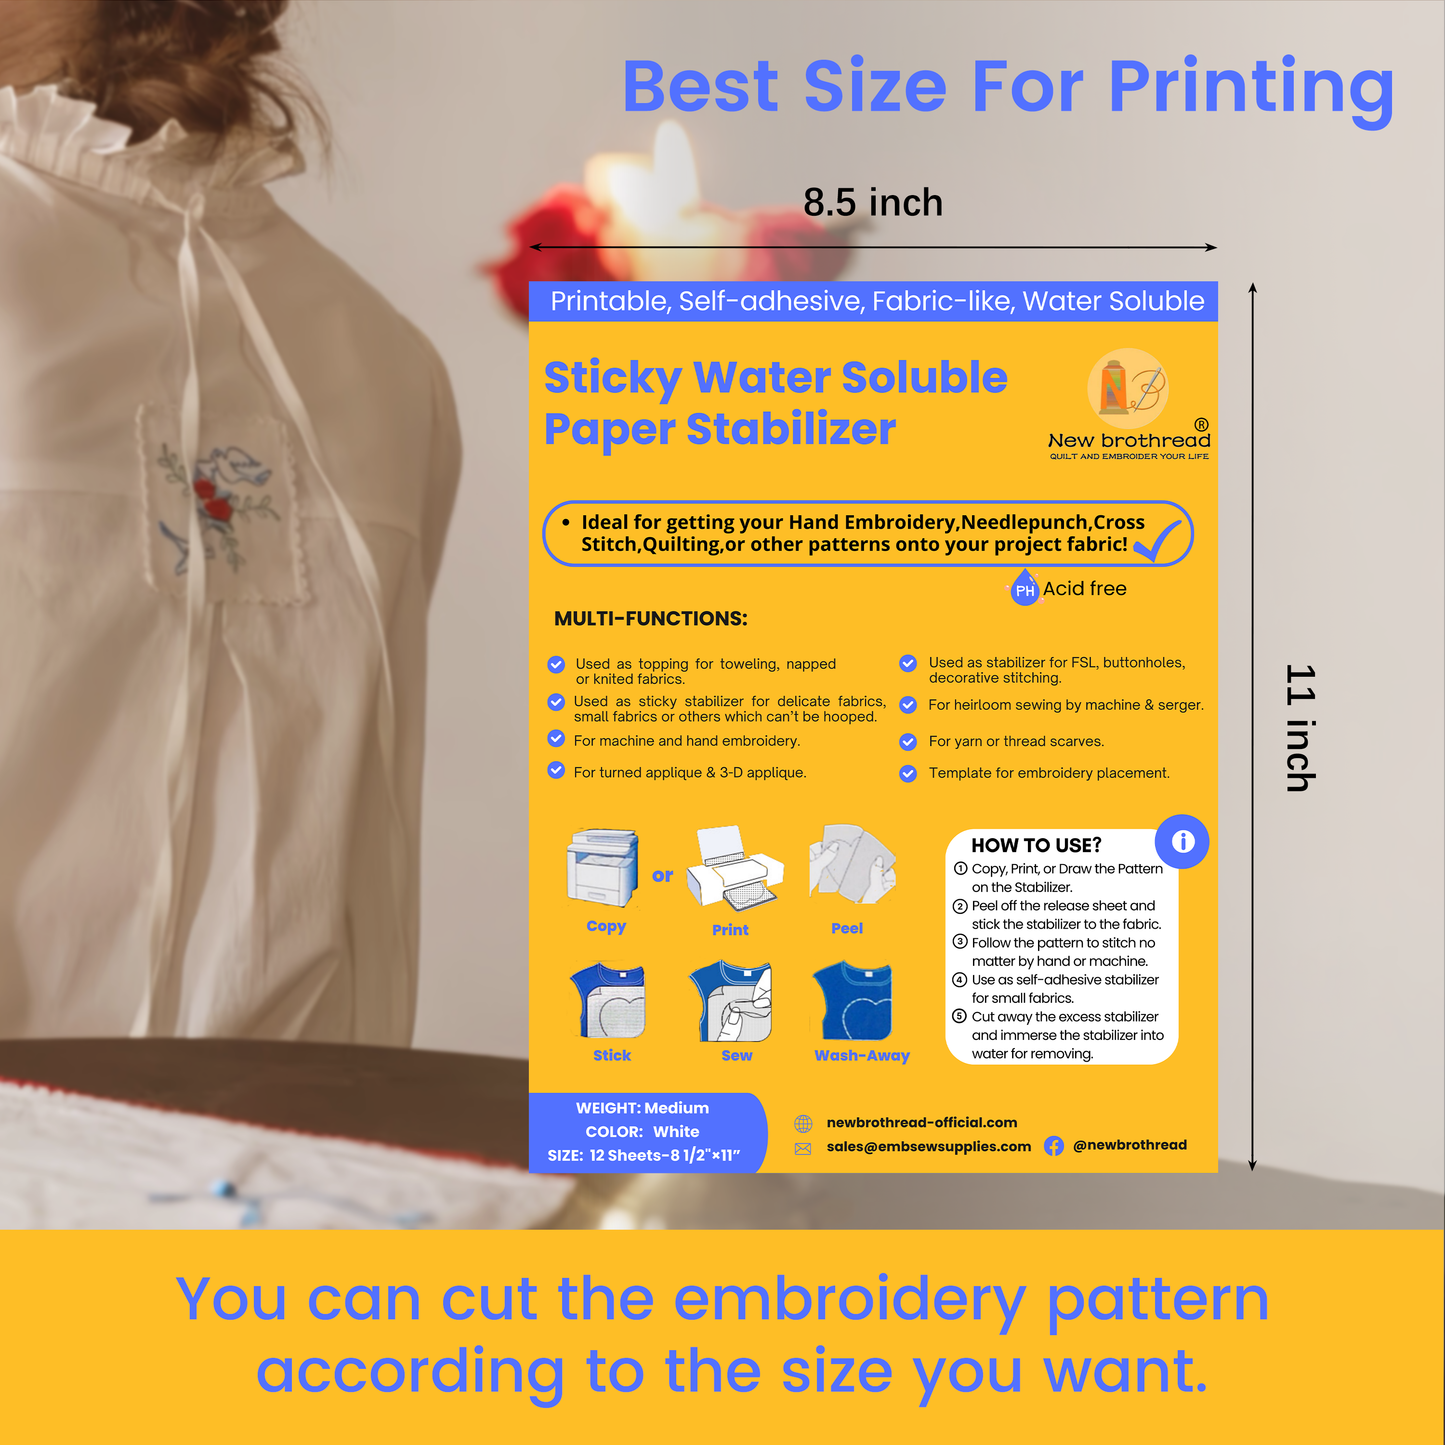 New brothread 12PCS 8.5"x11" Sticky Water Soluble Embroidery Stabilizer Printable Paper Stabilizer - Medium Weight - Allowed for Print or Draw Patterns Best for Hand & Machine Embroidery